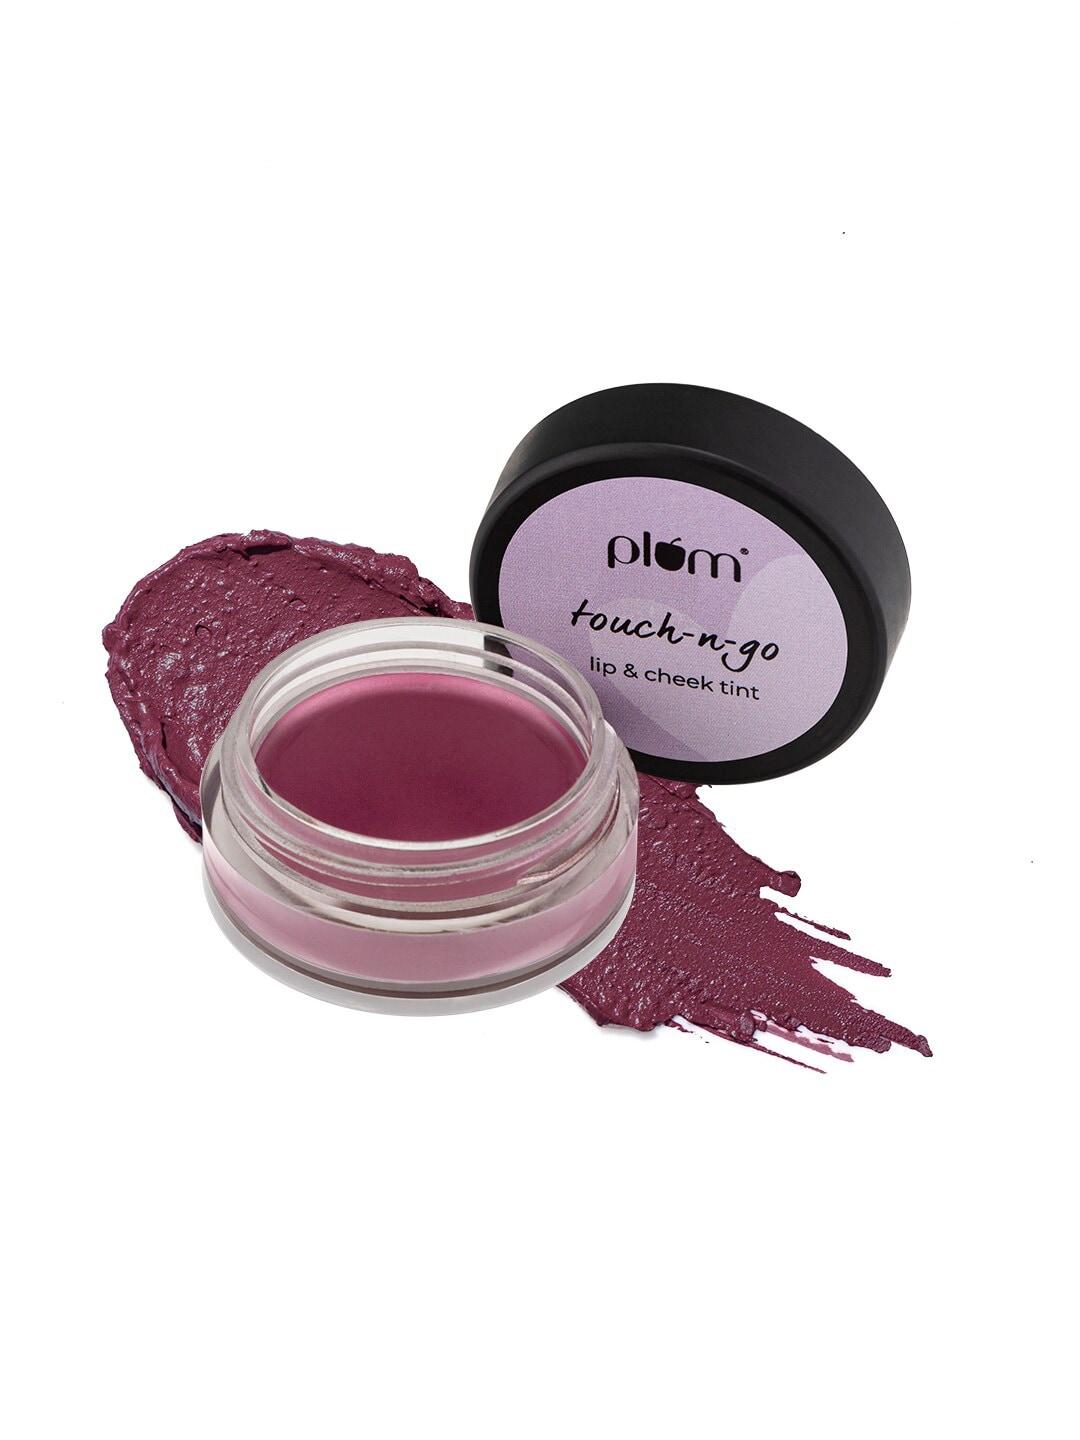 plum-highly-pigmented-touch-n-go-lip-&-cheek-tint,-5g---d-wine-125